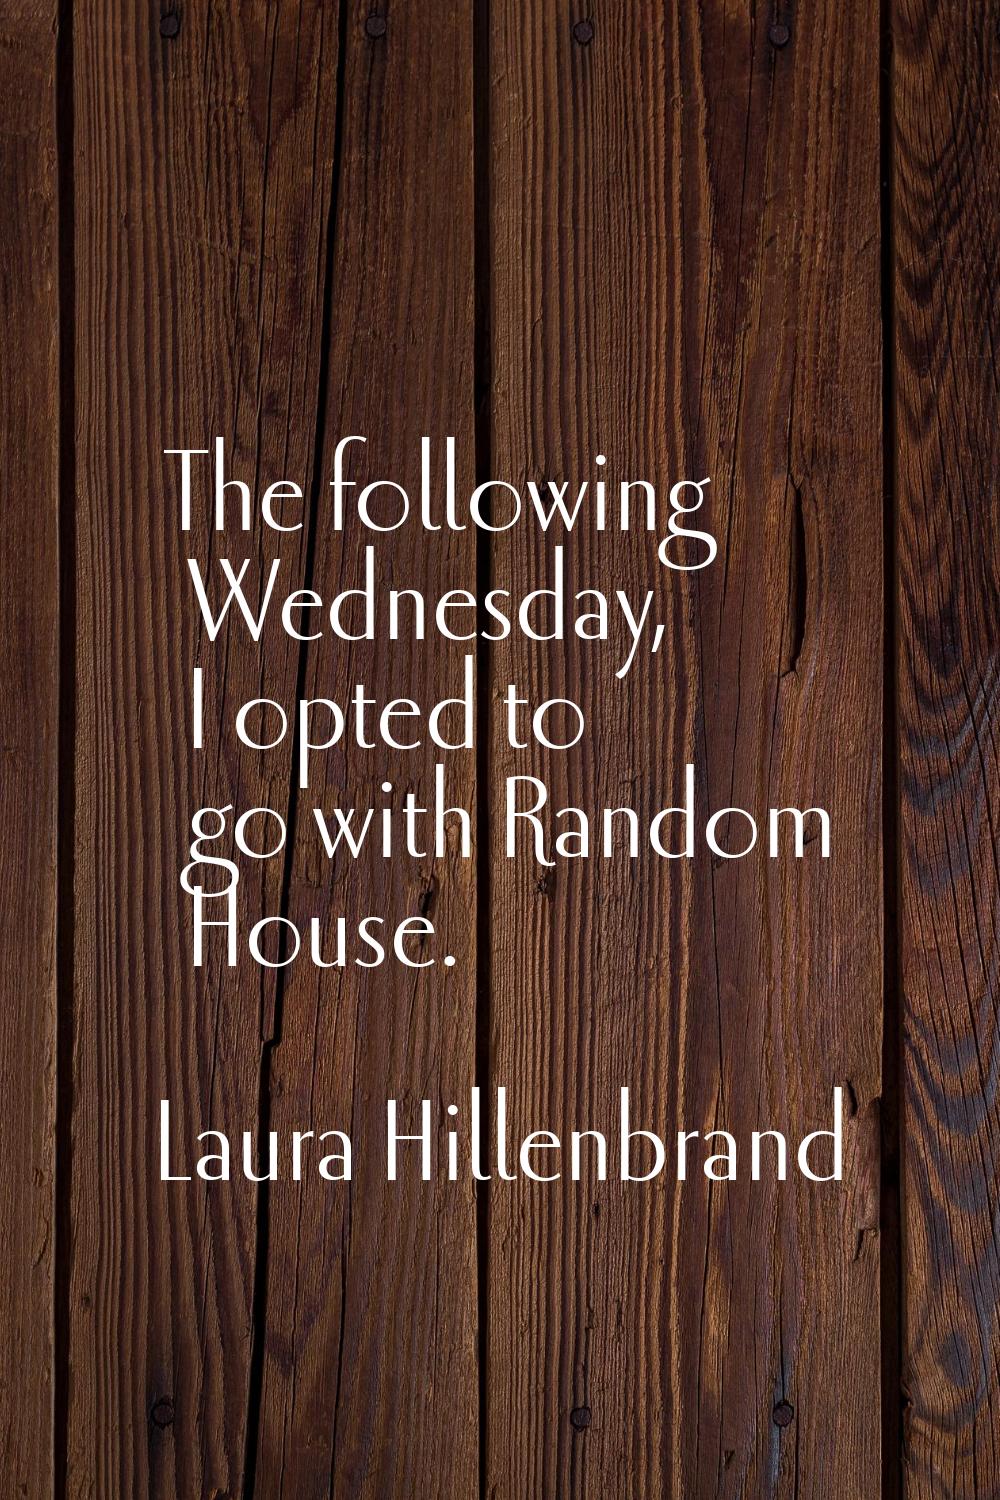 The following Wednesday, I opted to go with Random House.